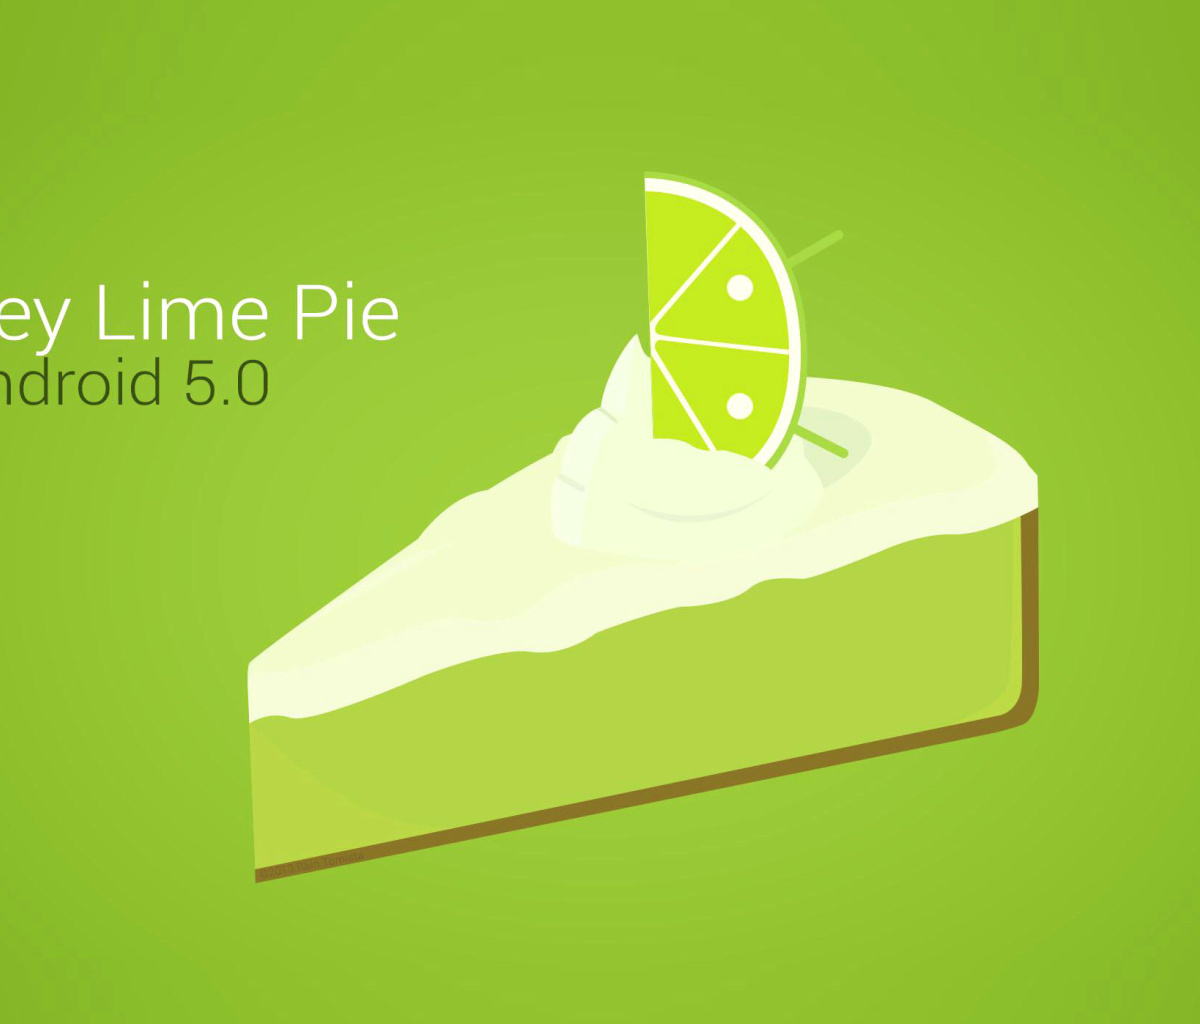 Concept Android 5.0 Key Lime Pie wallpaper 1200x1024